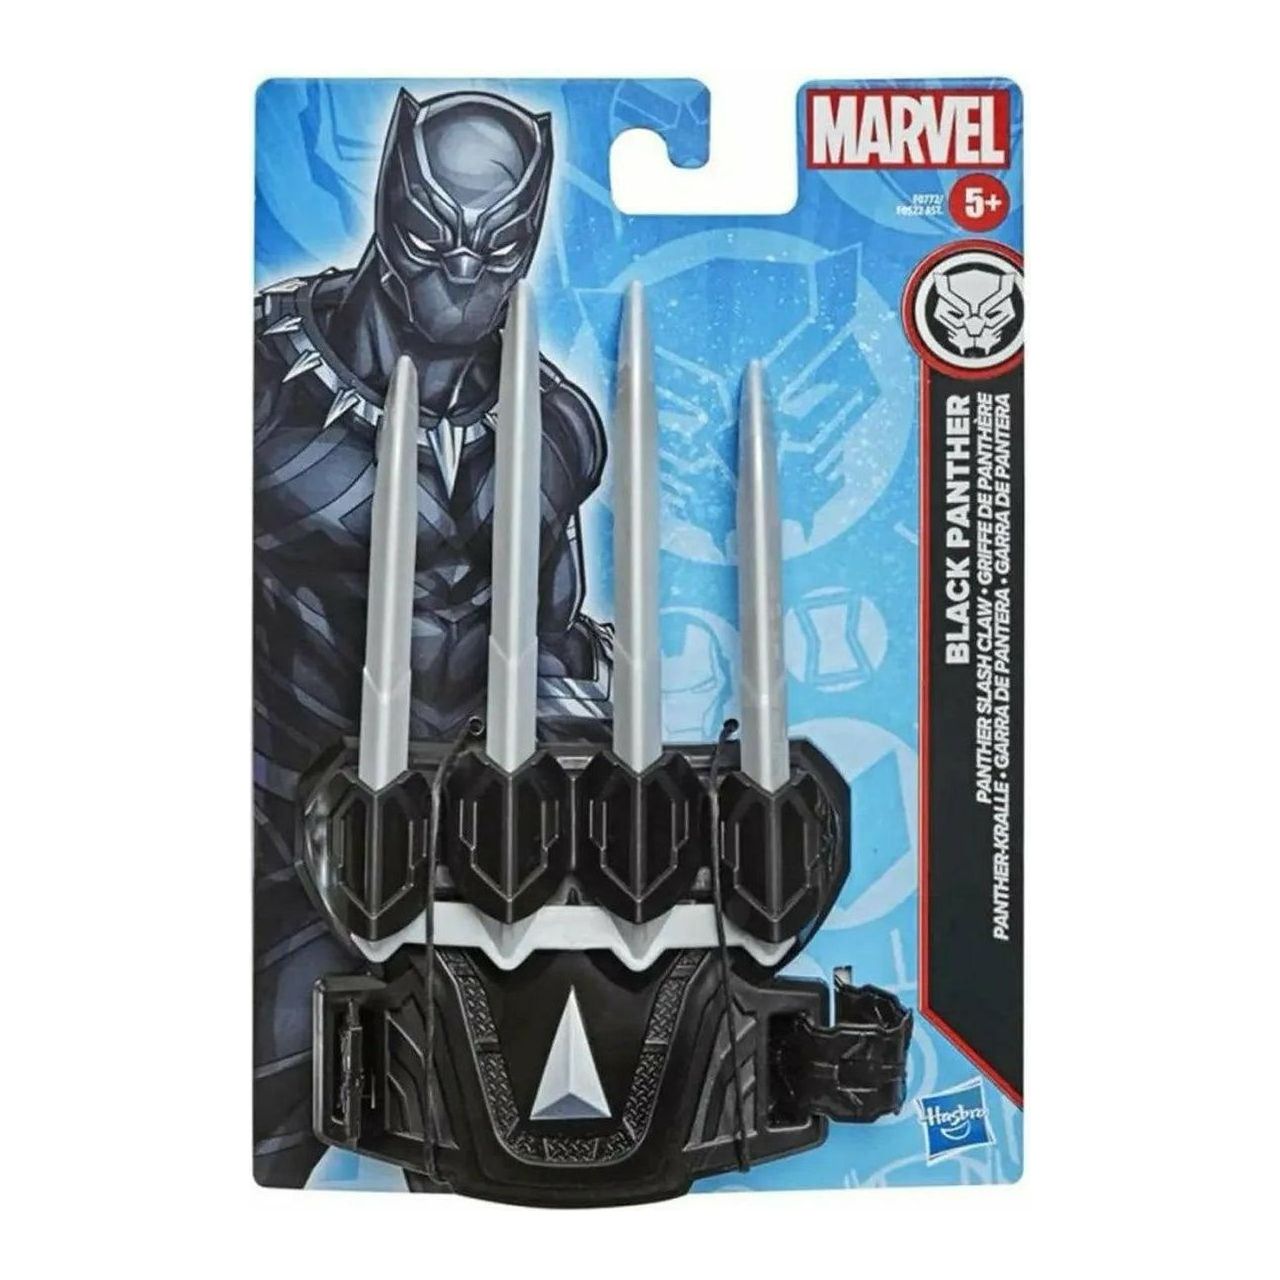 Hasbro MARVEL BLACK PANTHER GLOVE WITH CLAWS SLASH CLAW F0522 - BumbleToys - 6+ Years, Accessories, Action Figures, Black Panther, Boys, Eagle Plus, Figures, Marvel